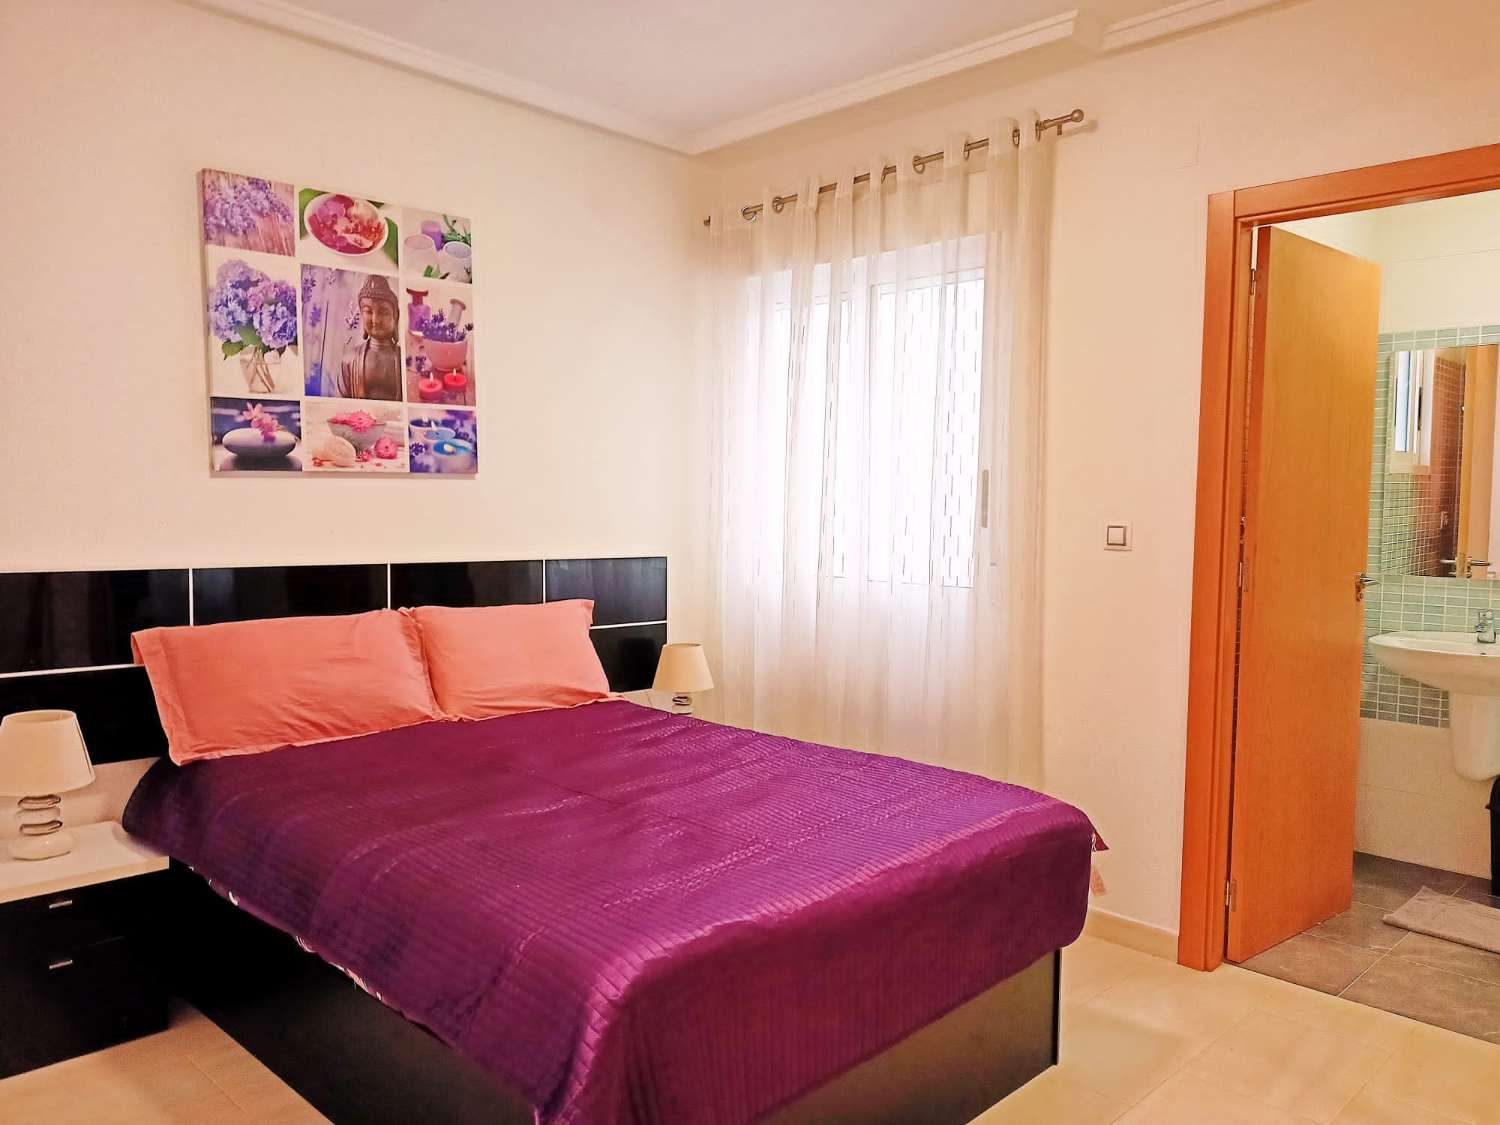 2 bedroom apartment to move into in Torrevieja (Costa Blanca South)